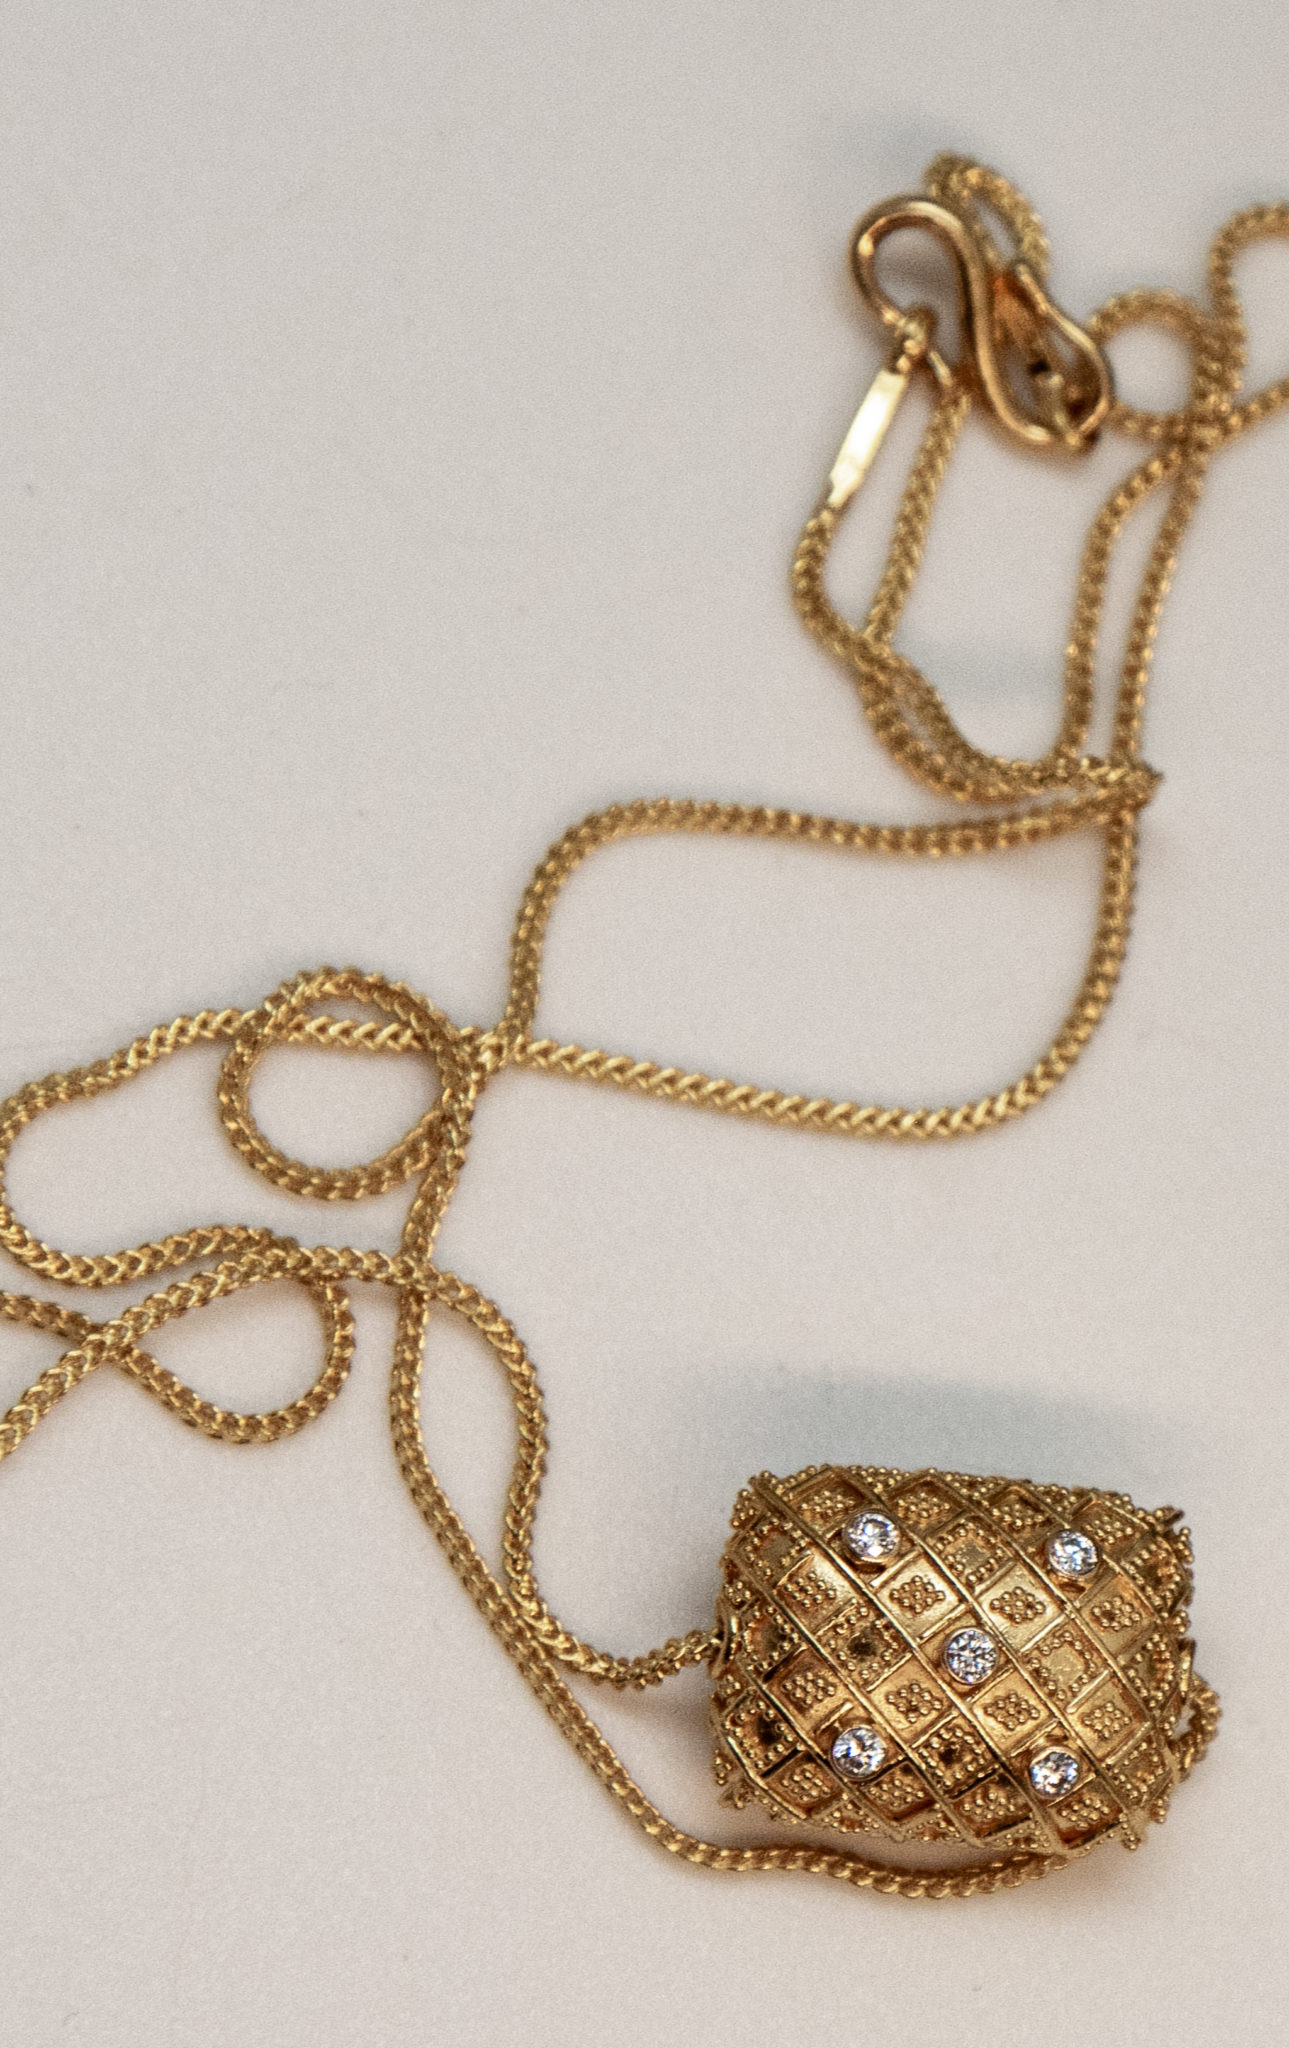 detail of Bali 22K gold bead pendant on matching chain with double S curve clasp